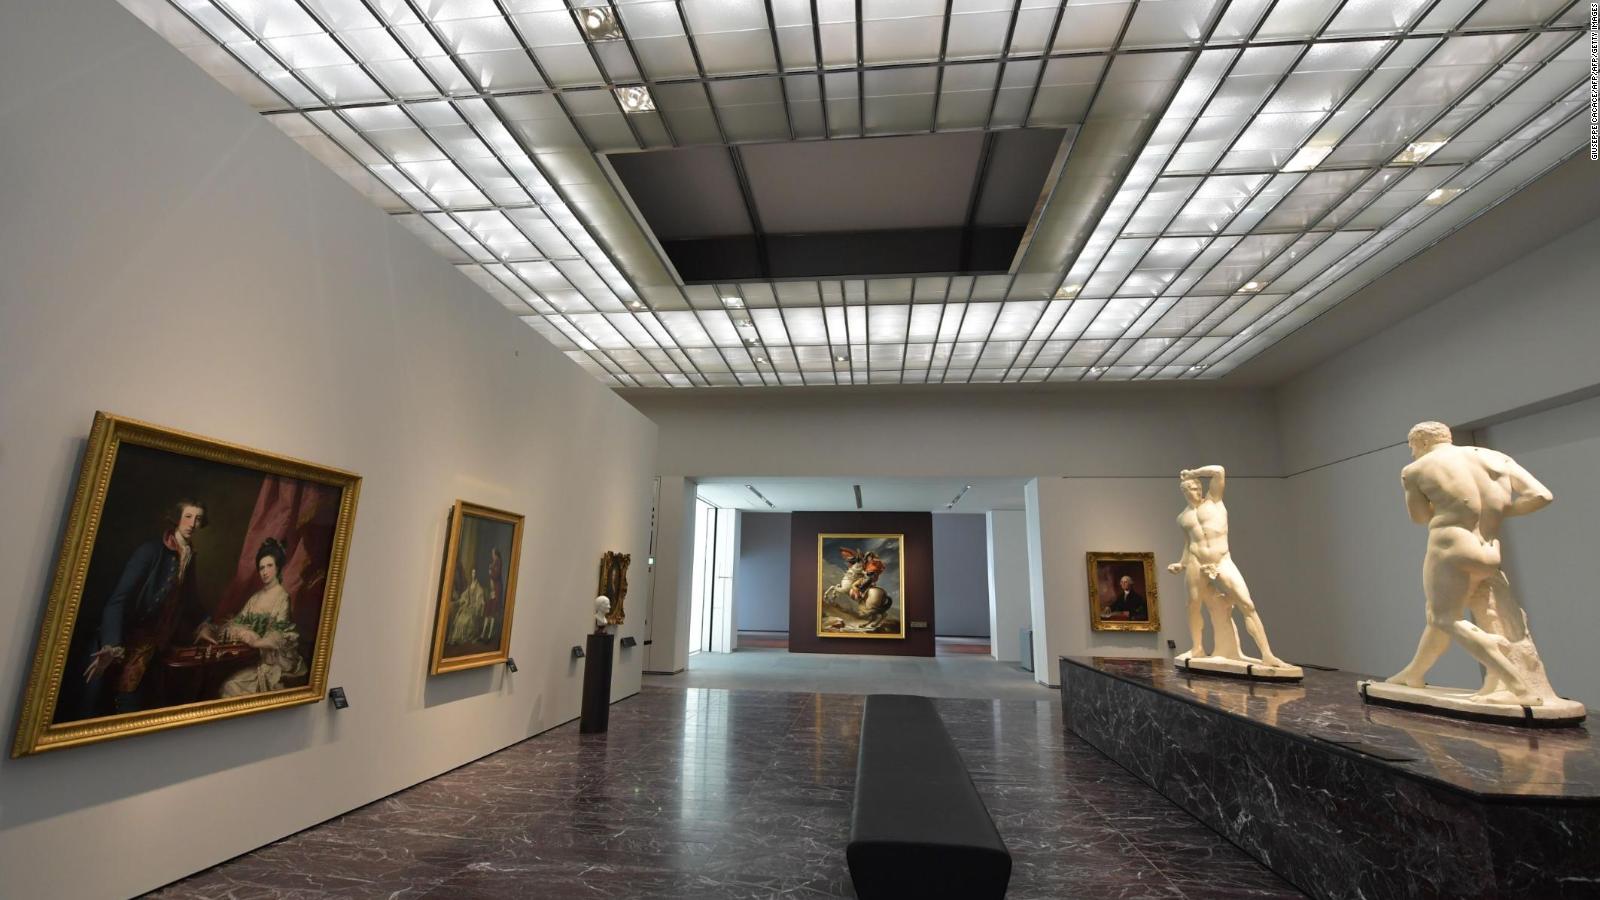 Louvre Abu Dhabi Receives Million Visitors In Its First Year